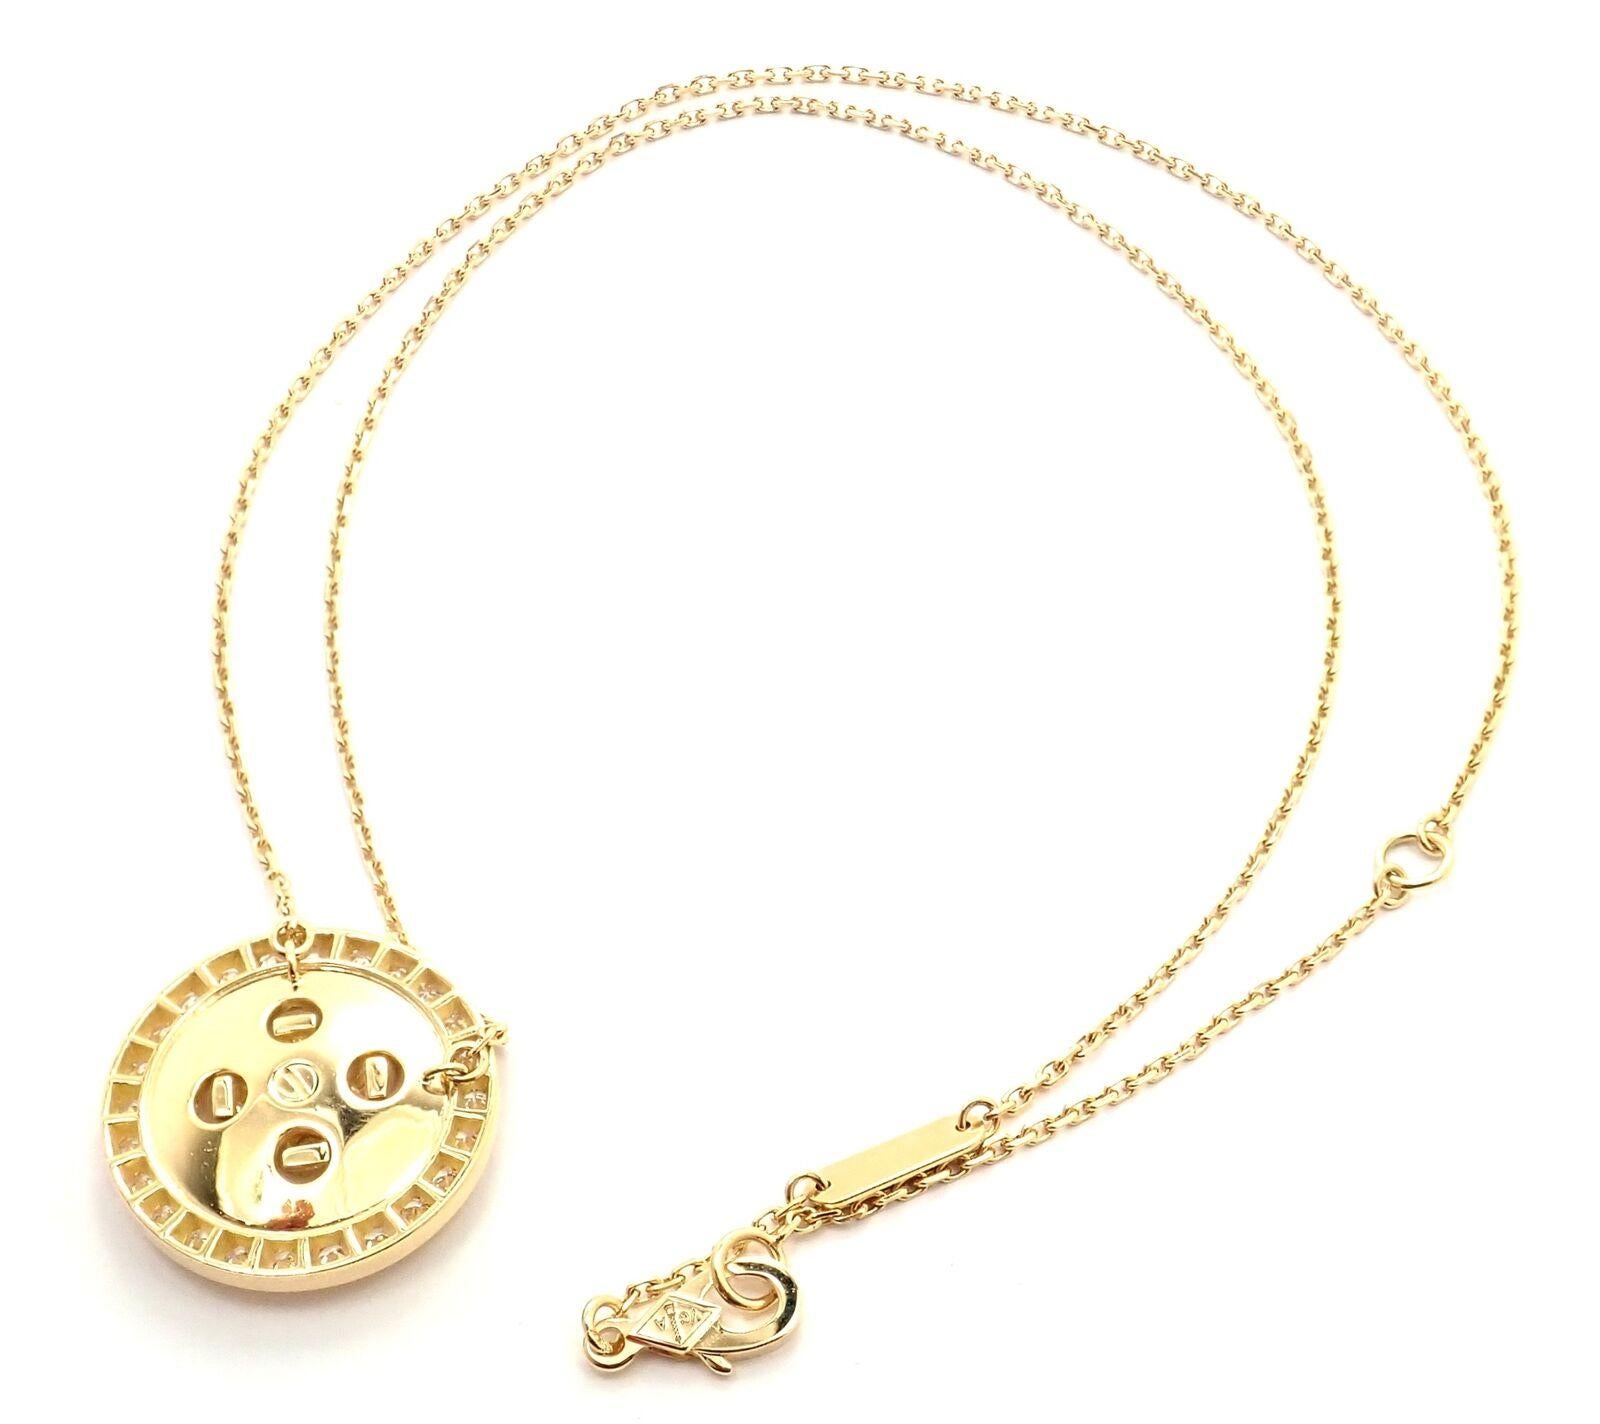 Van Cleef & Arpels Diamond Gold Button Pendant Necklace In Excellent Condition For Sale In Holland, PA